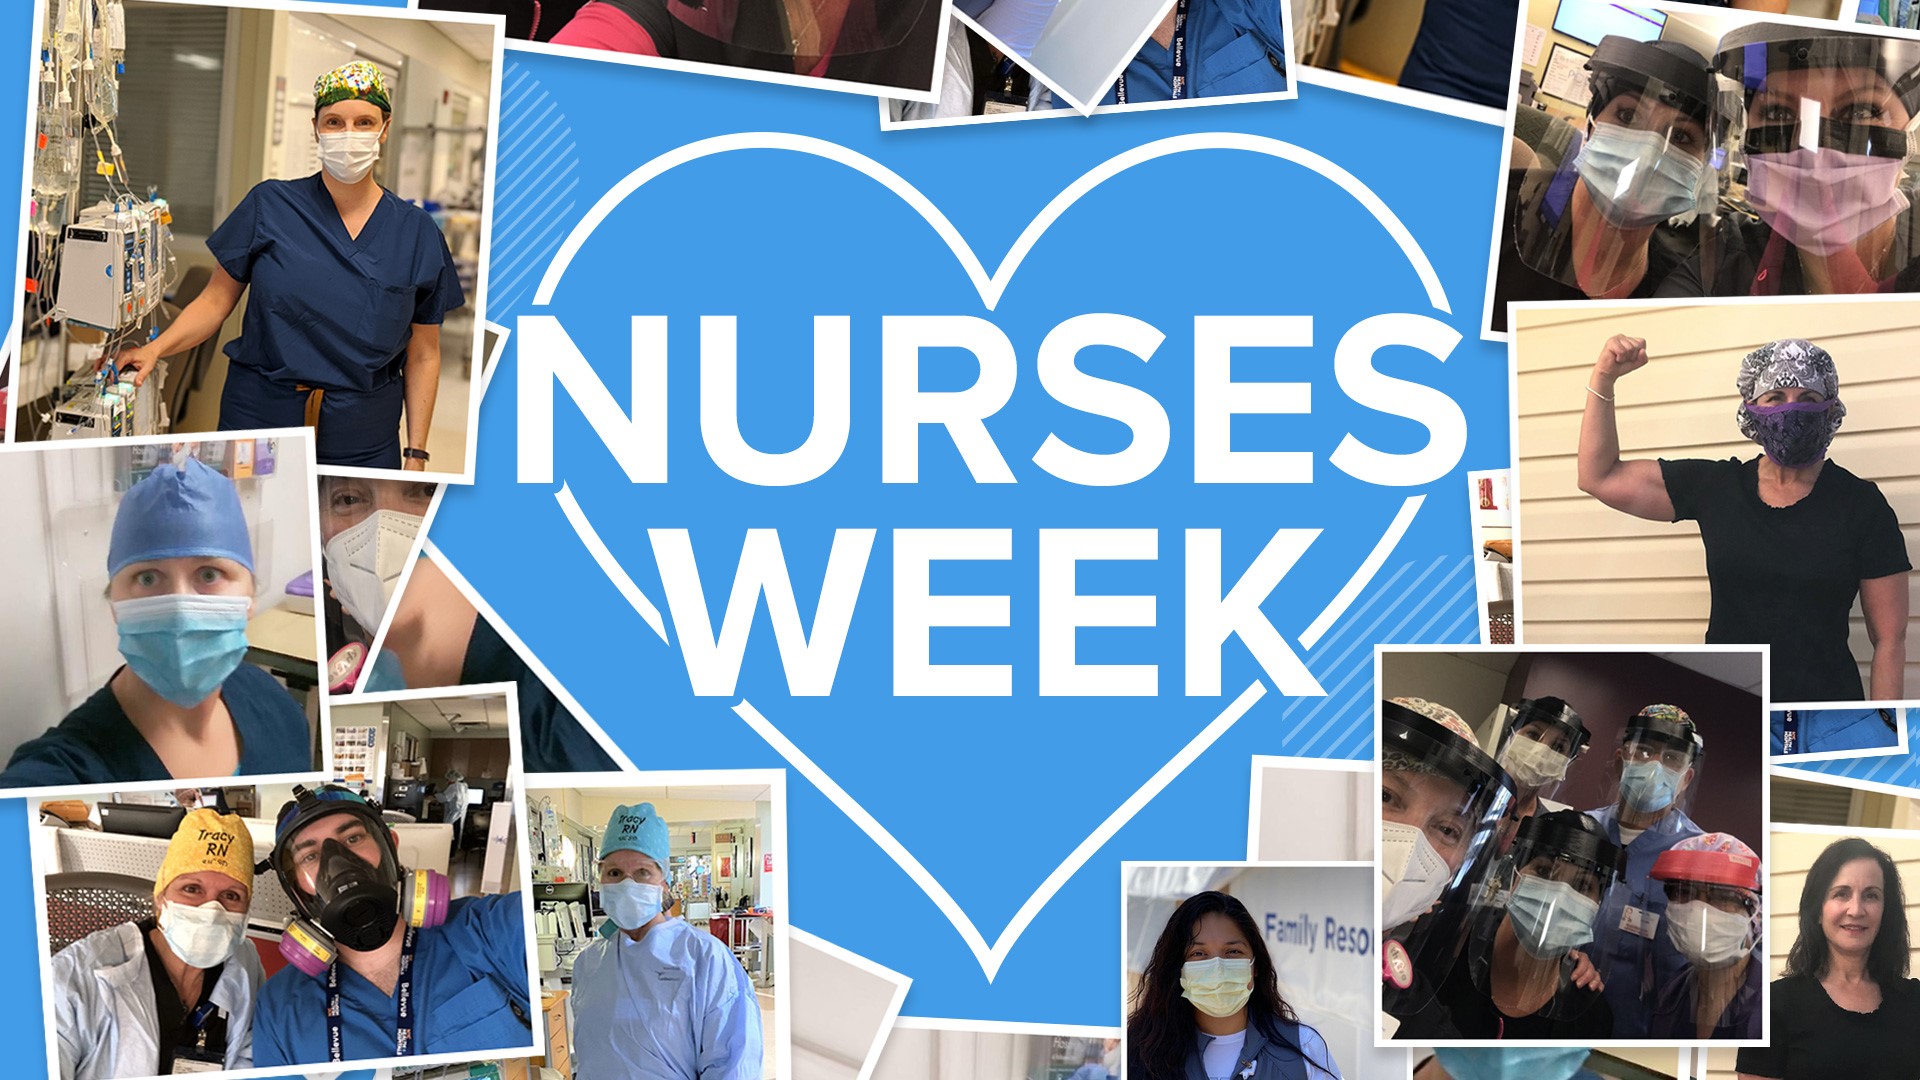 The photo and tributes of thanks from San Diegans to nurses, as we begin our celebration of National Nurses Week